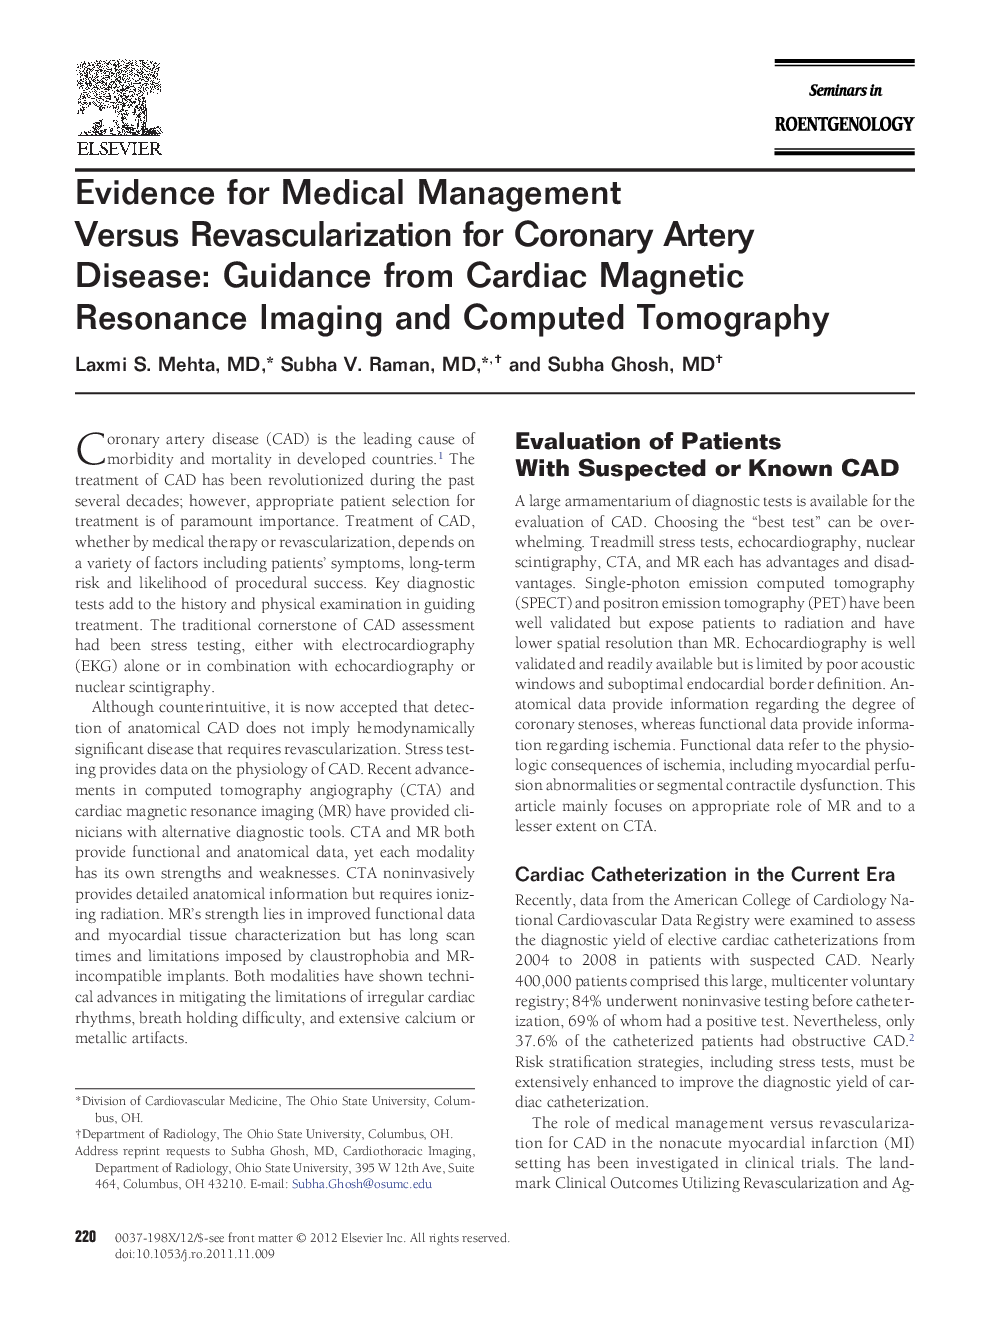 Evidence for Medical Management Versus Revascularization for Coronary Artery Disease: Guidance from Cardiac Magnetic Resonance Imaging and Computed Tomography